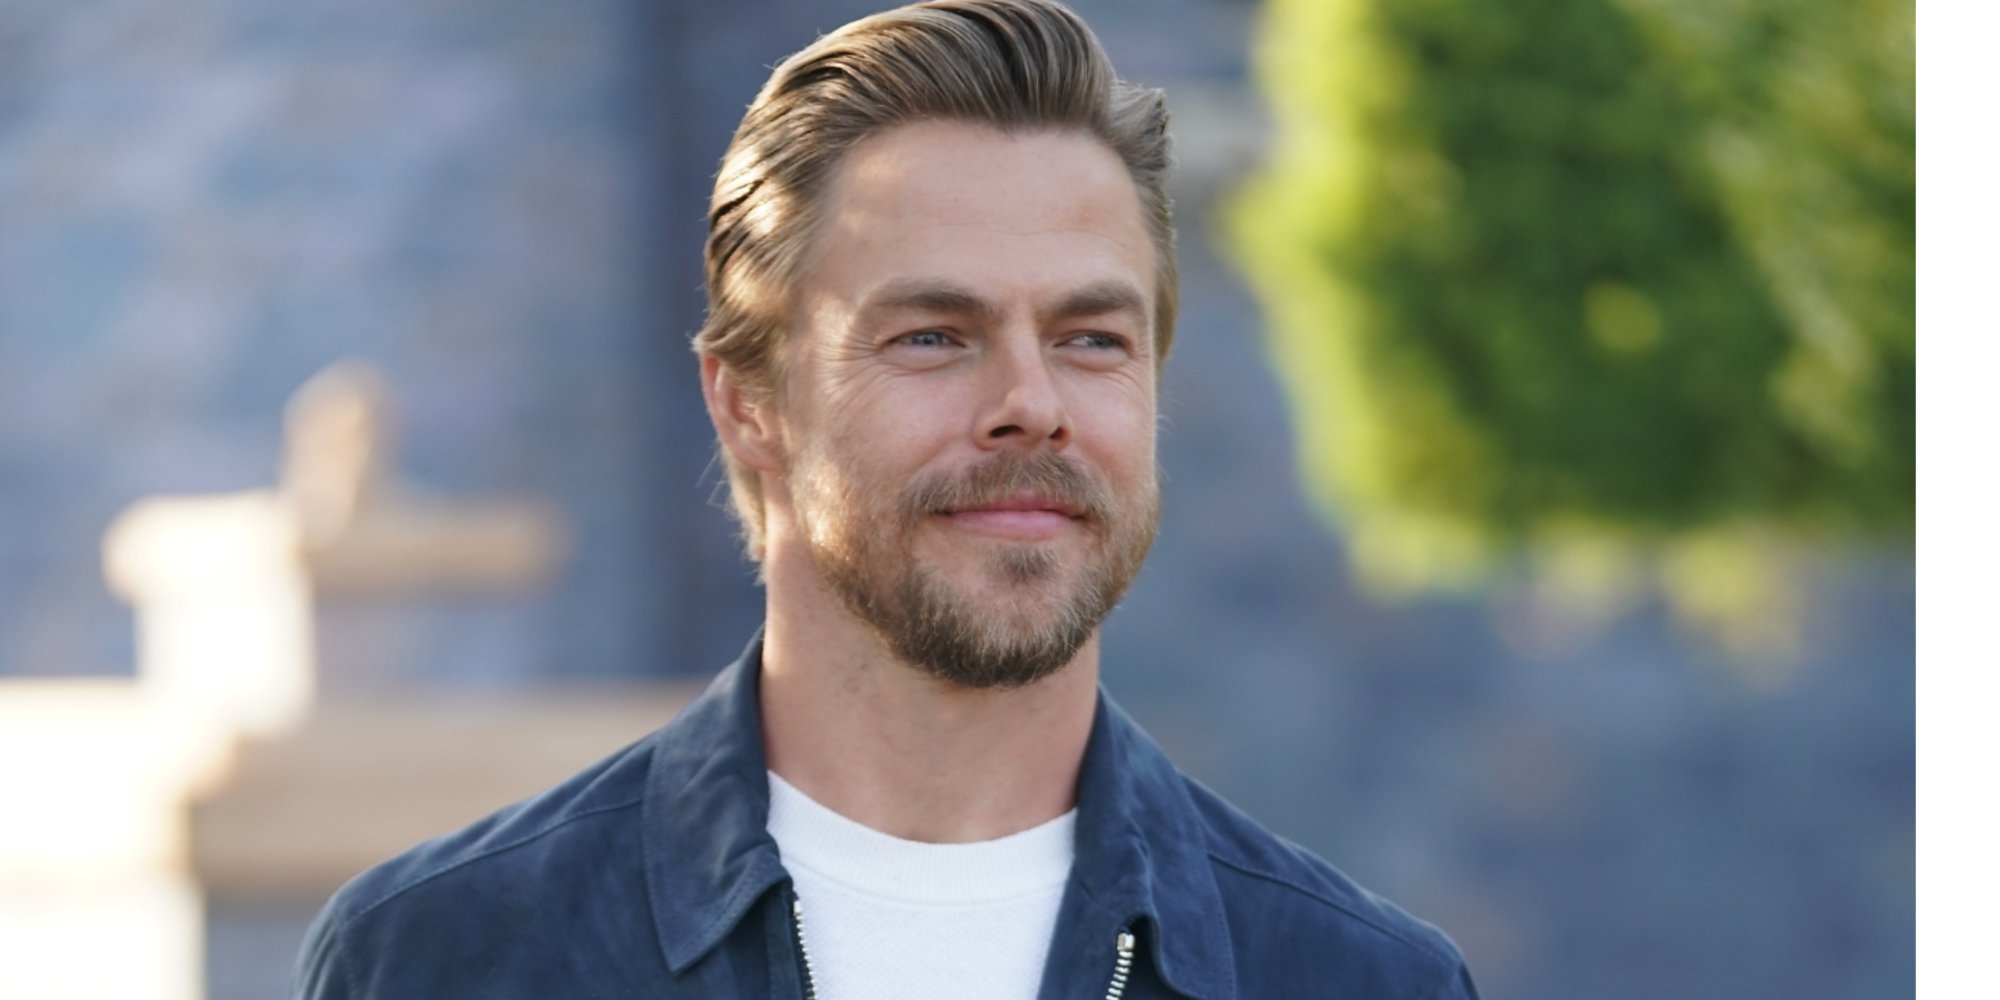 Derek Hough poses for photographers ahead of season 31 of 'Dancing With the Stars.'